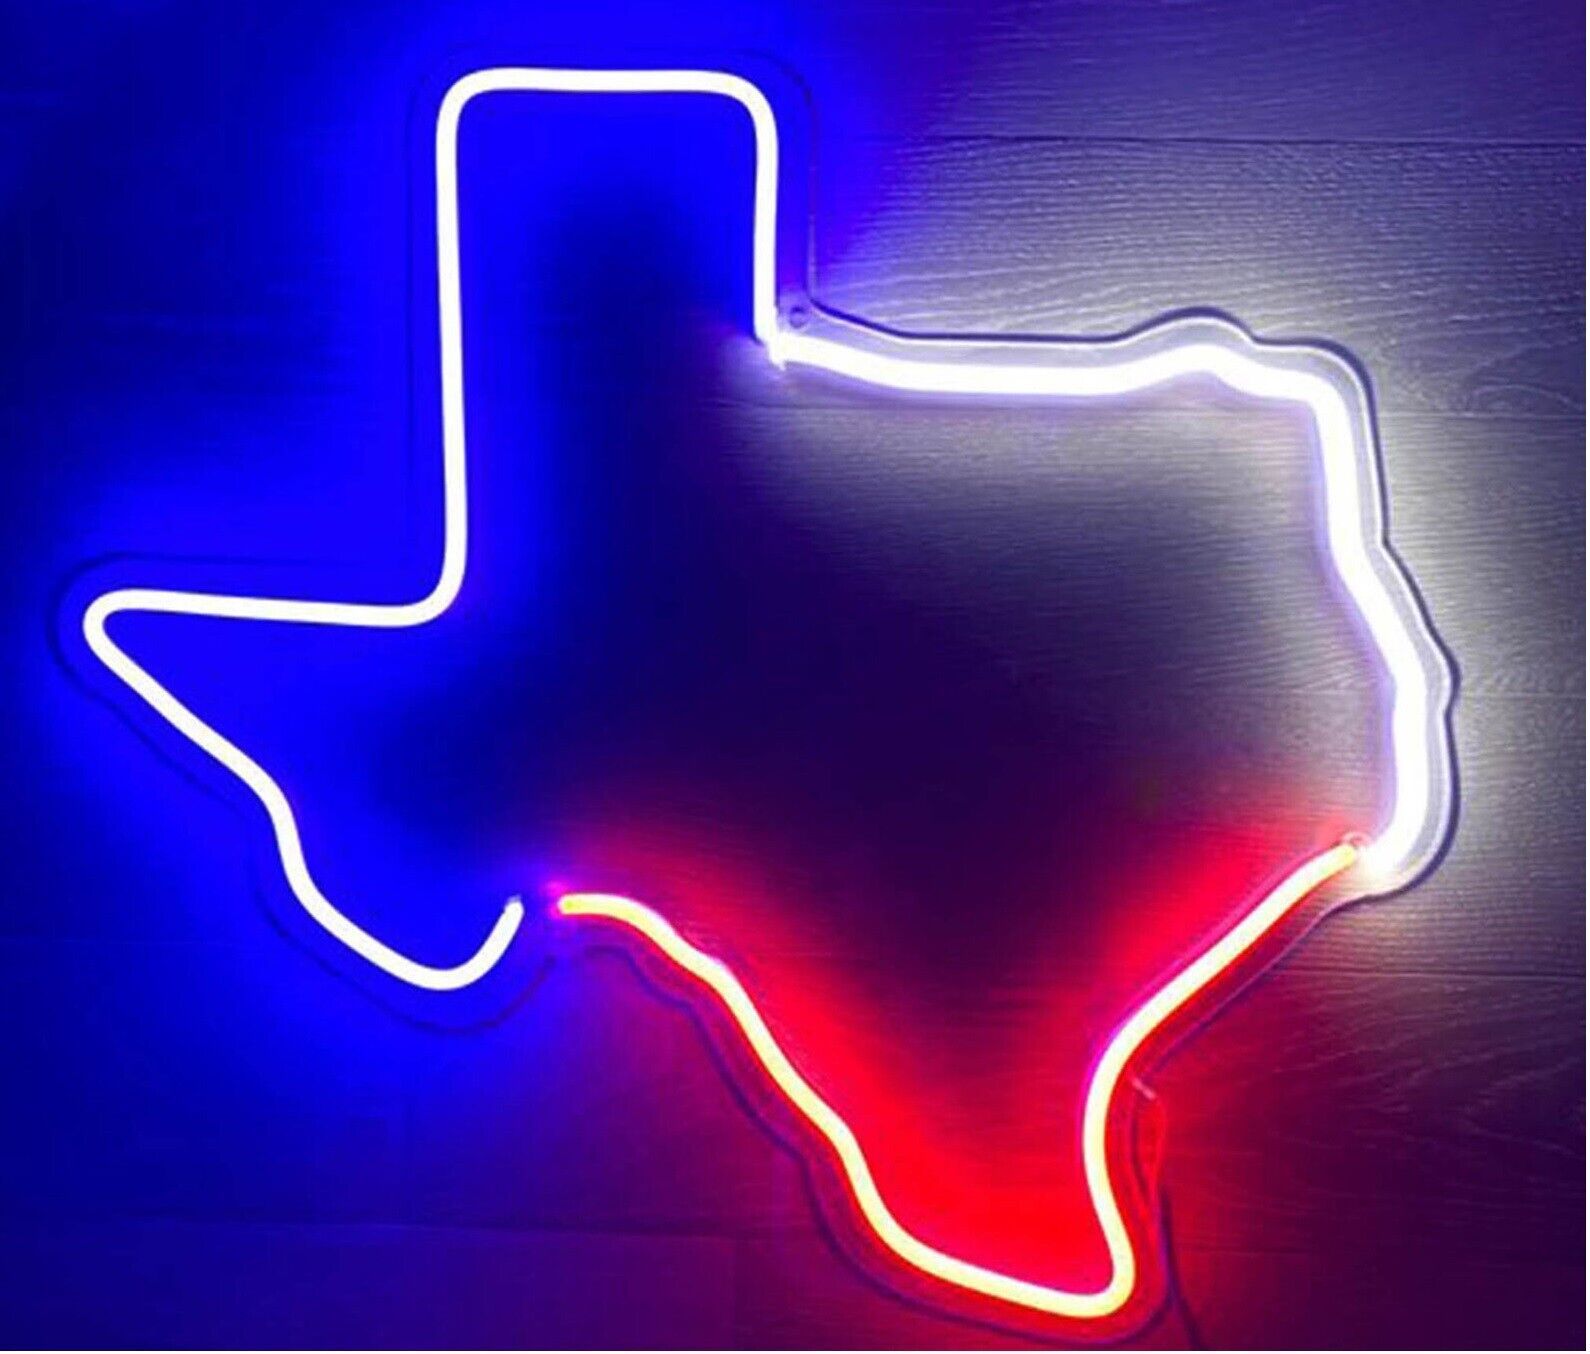 A neon sign of the state texas - Texas